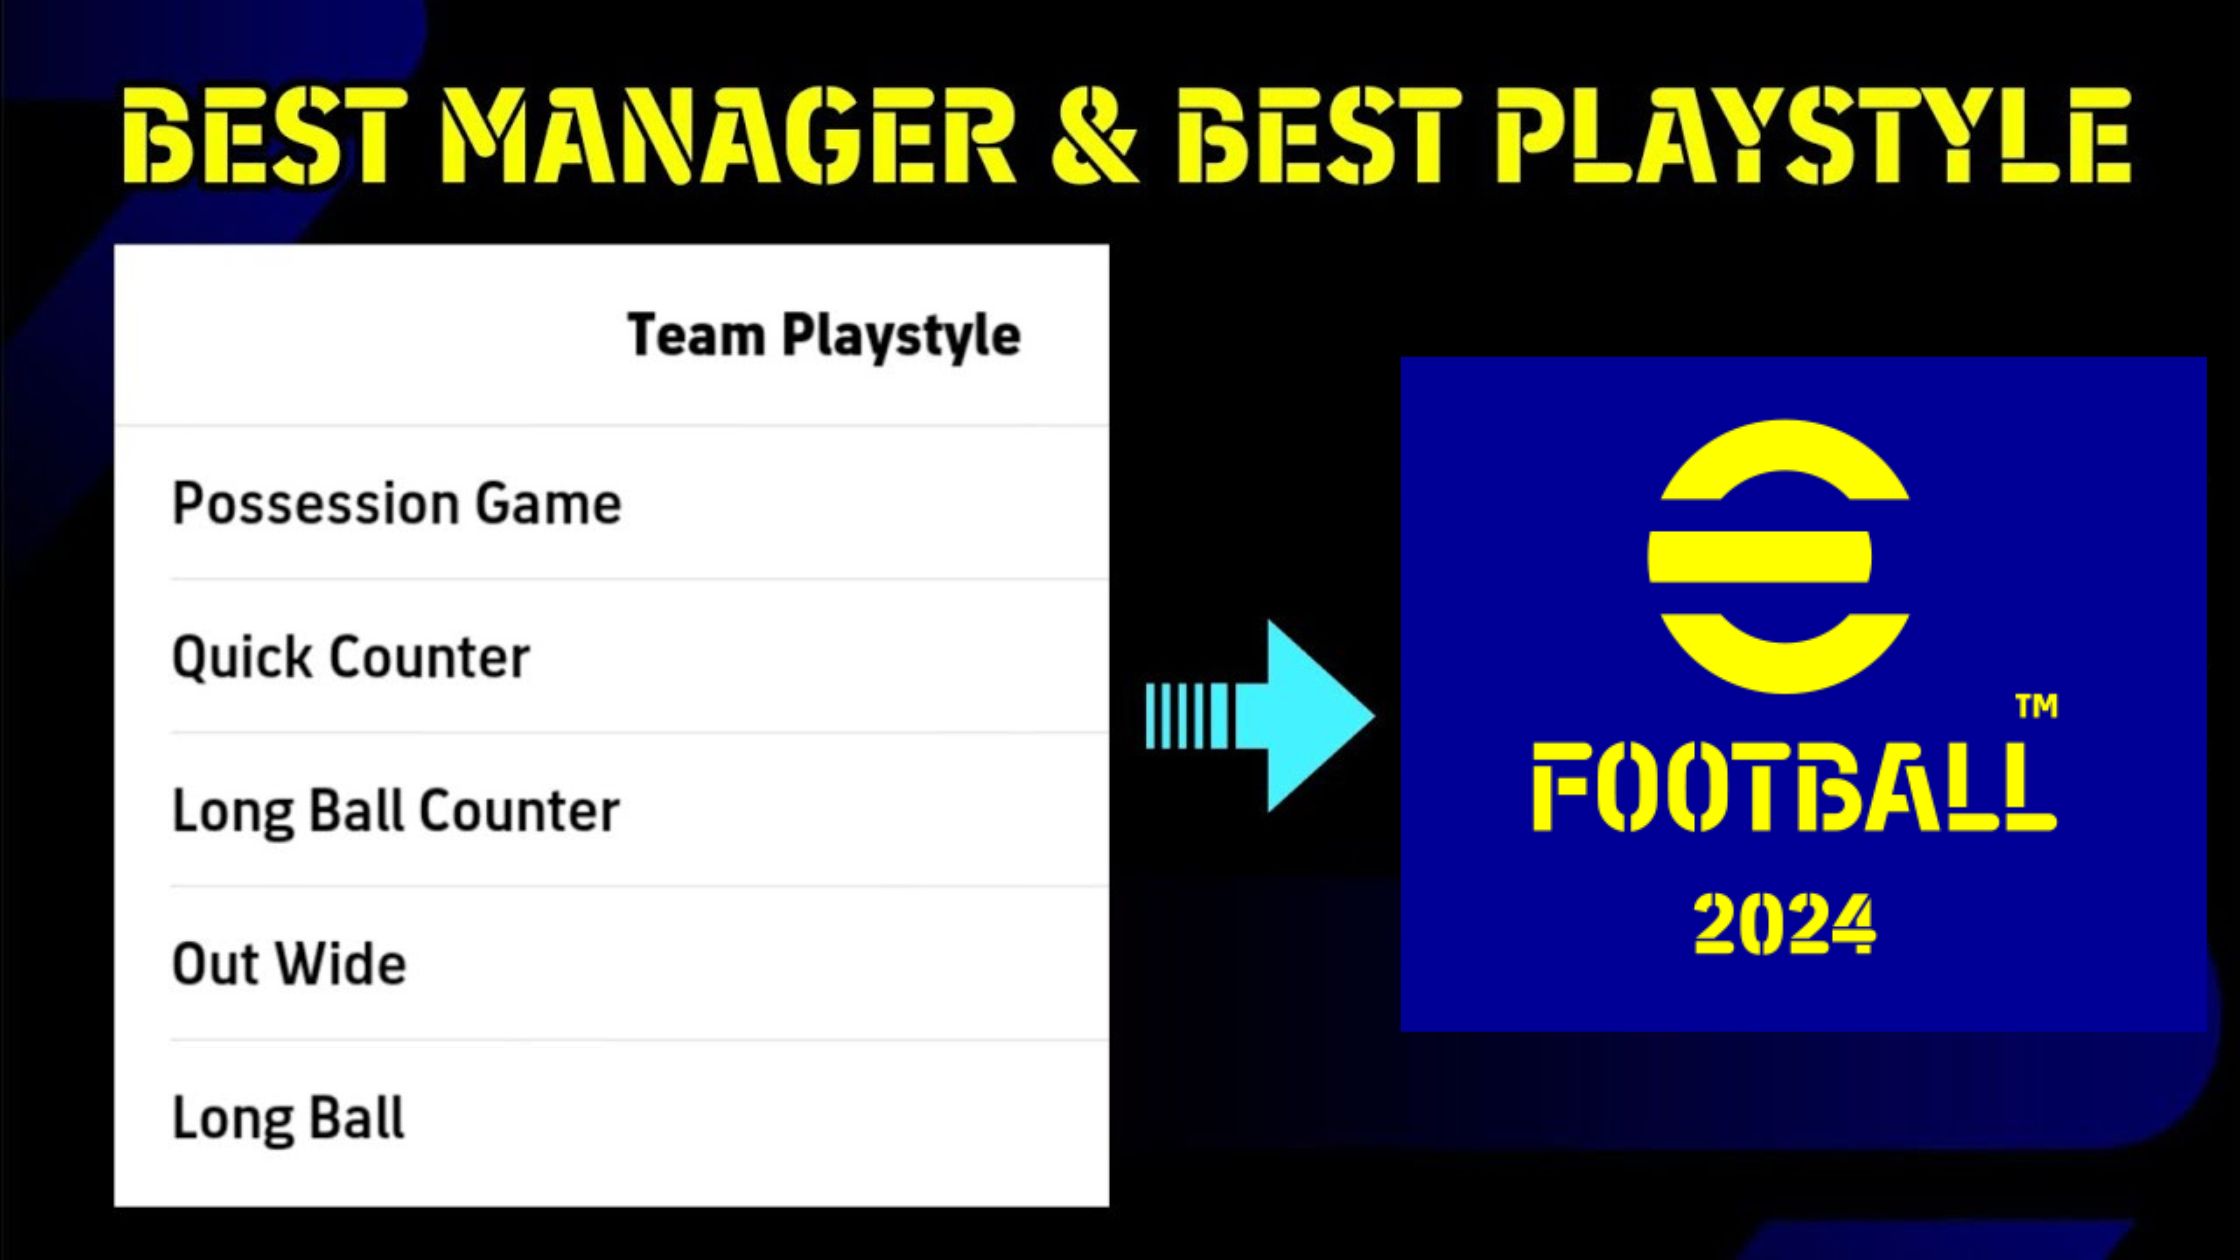 The best managers and playstyles in eFootball 2024